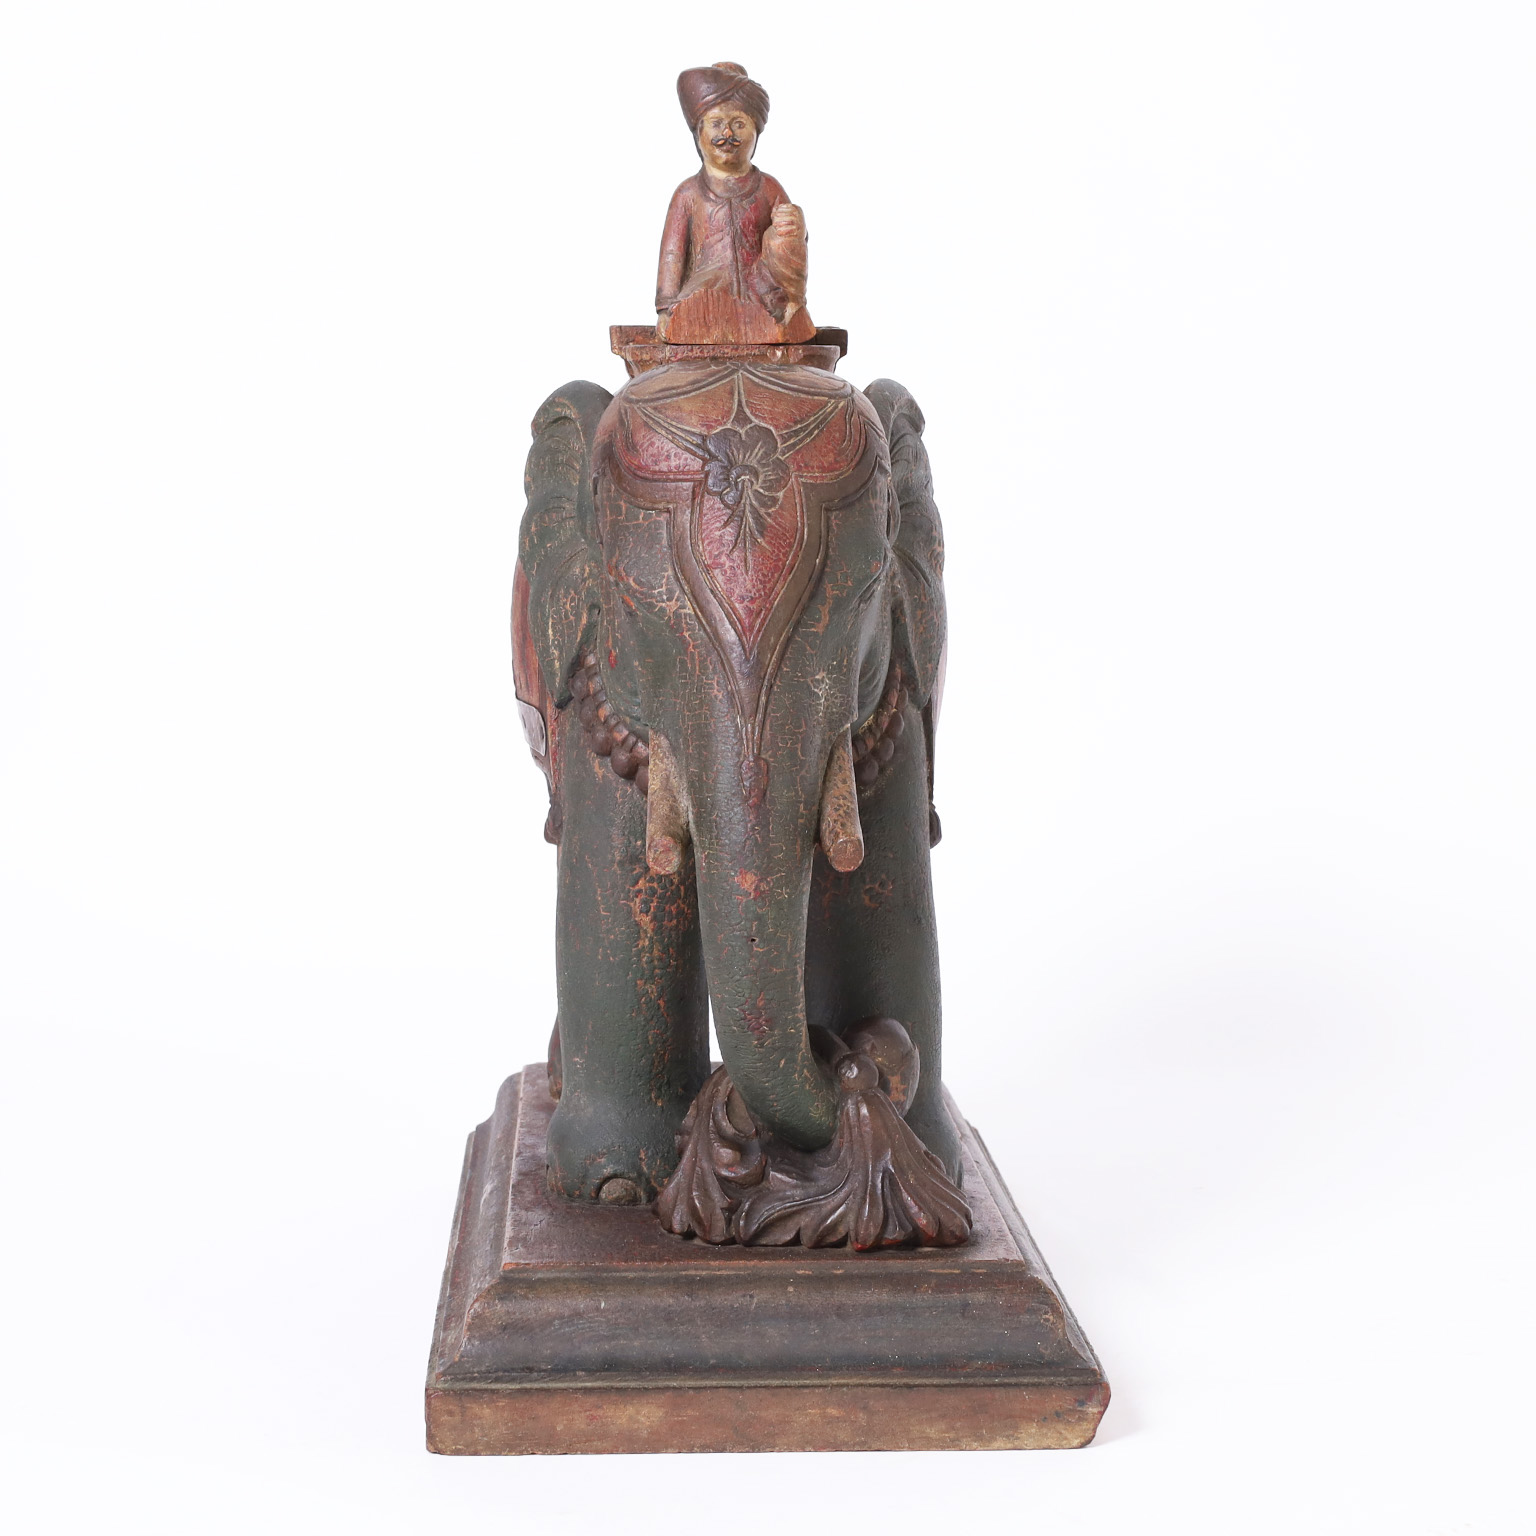 19th Century Anglo Indian Carved Wood Elephant